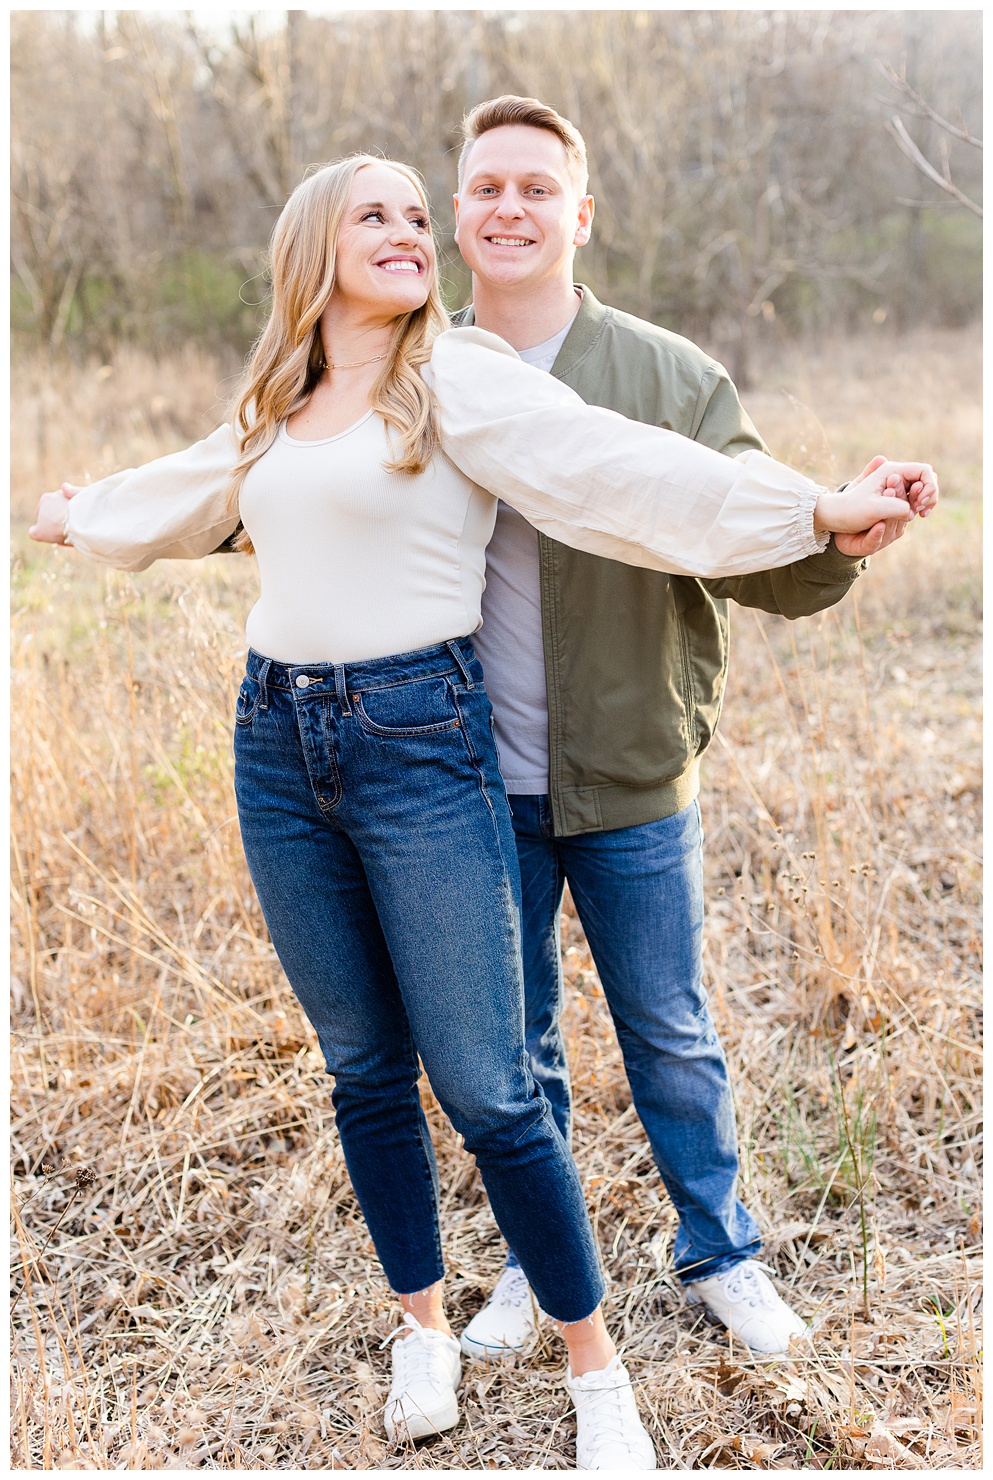 Engagement photography at Capen Park in Columbia Missouri